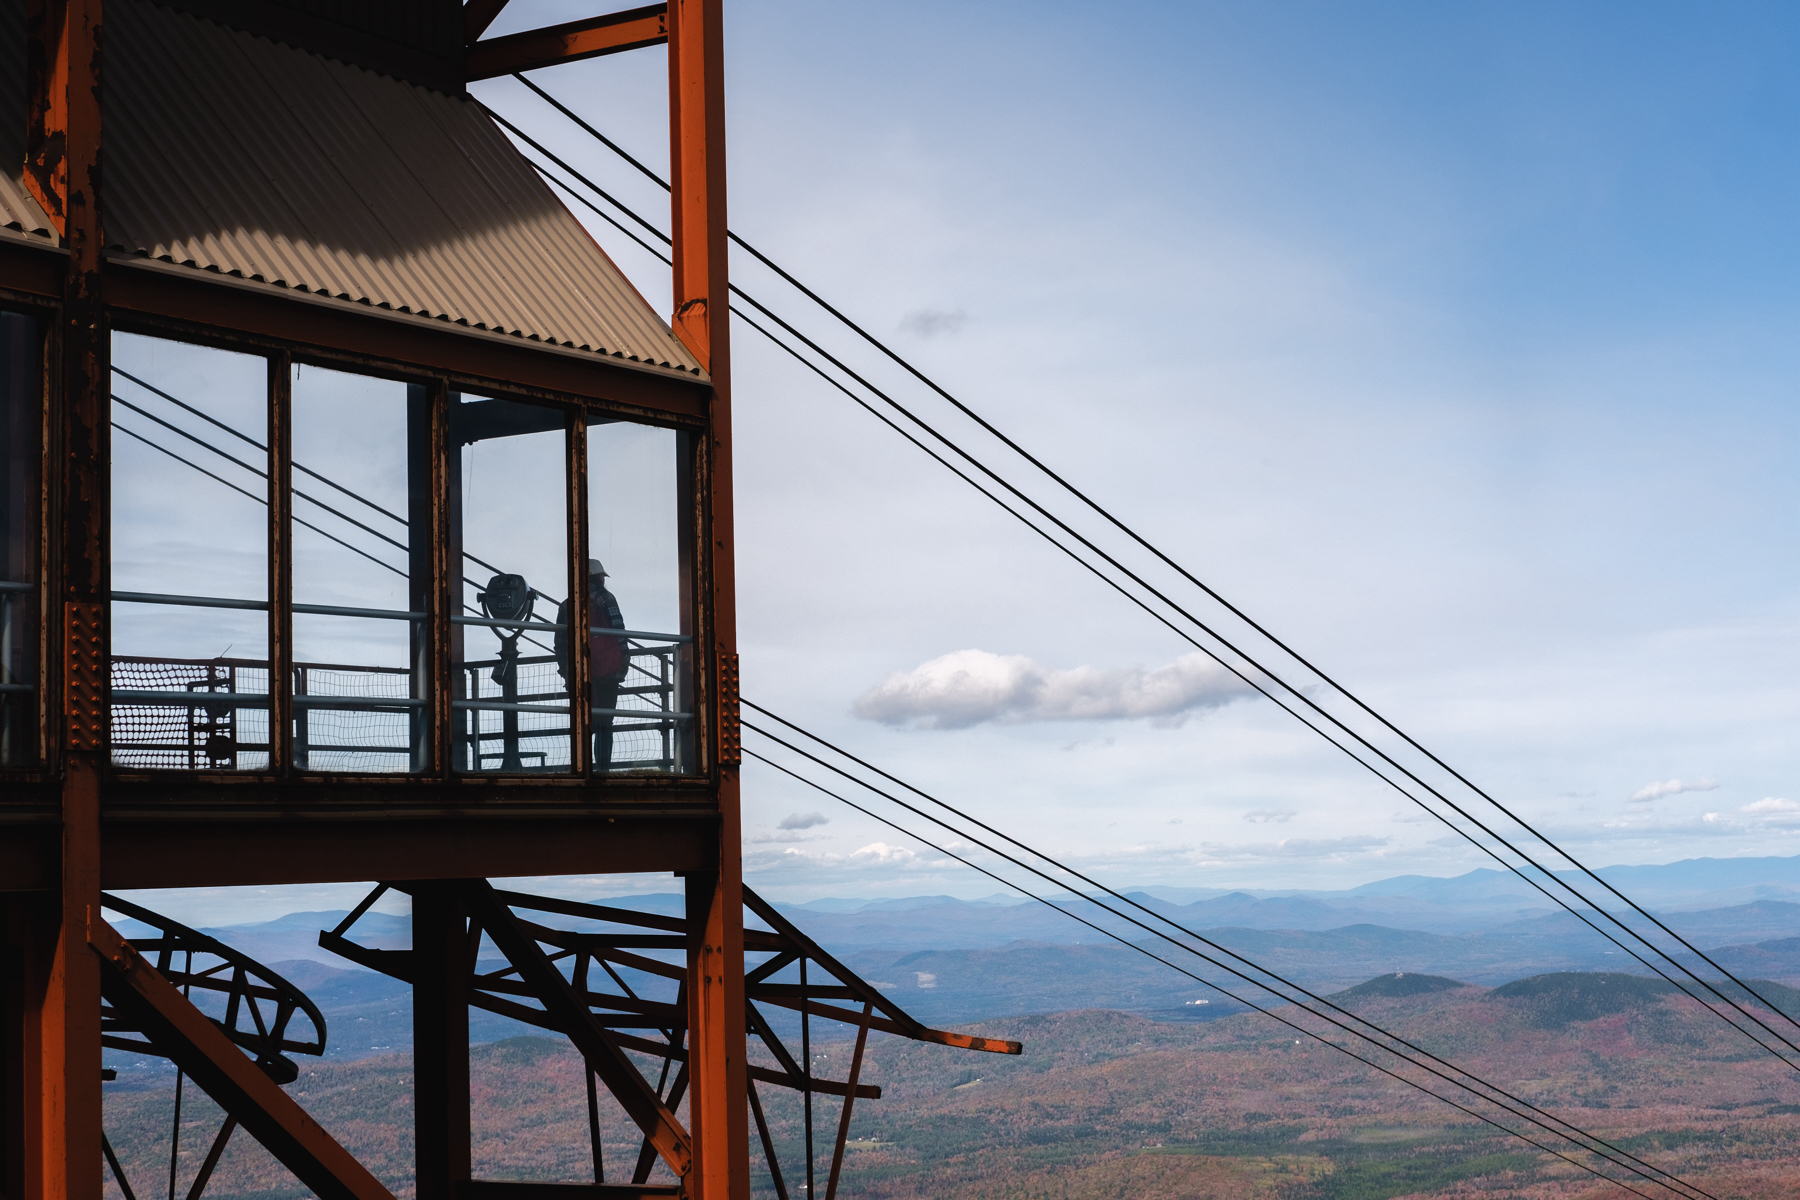 A ski lift tower with a lone person standing on the observation deck, thick cables running diagonally across the frame, and a panoramic view of a mountainous landscape under a blue sky with clouds.